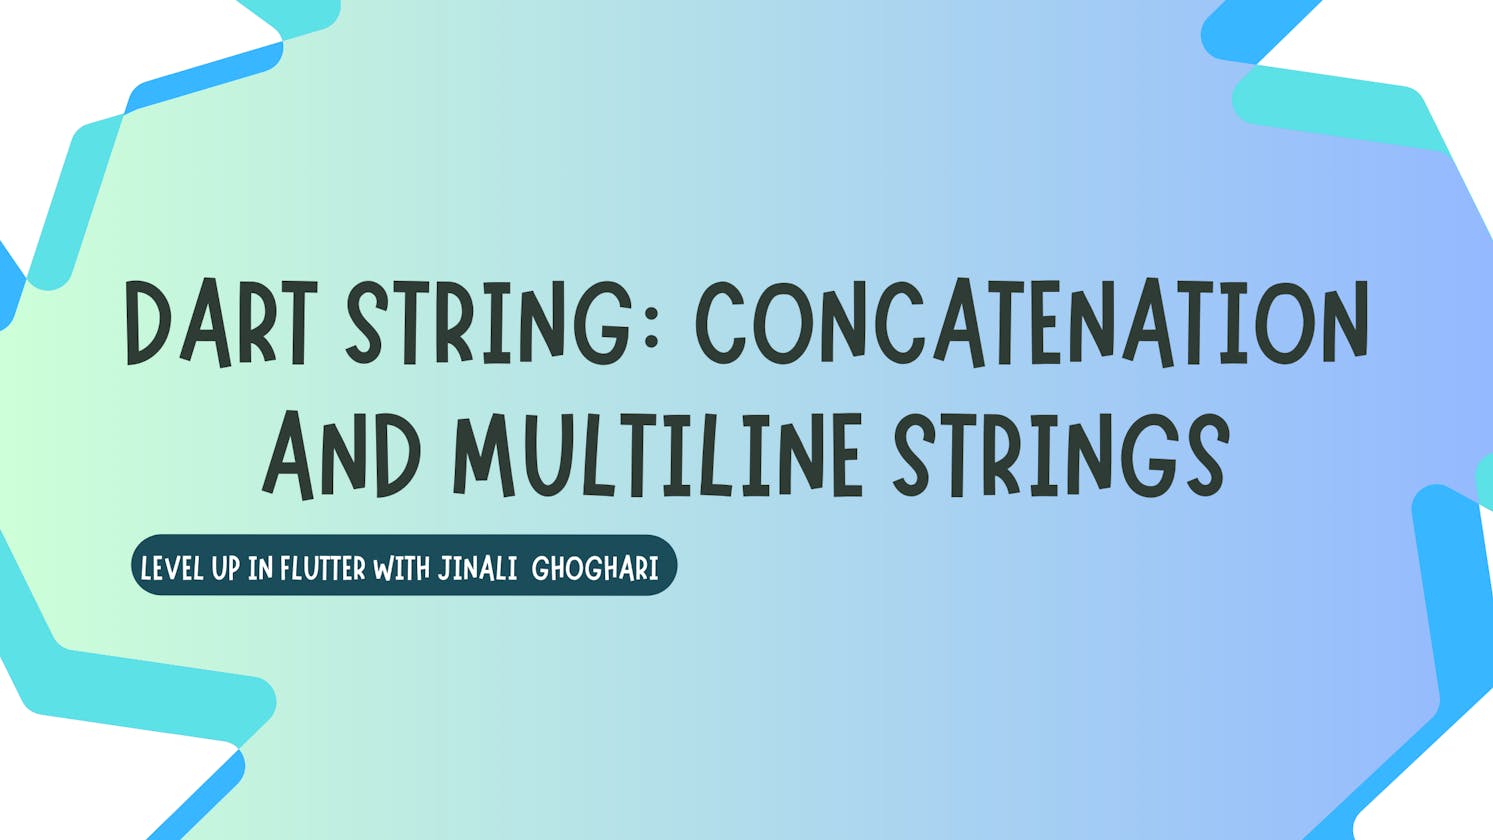 Dart String: Concatenation and Multiline Strings